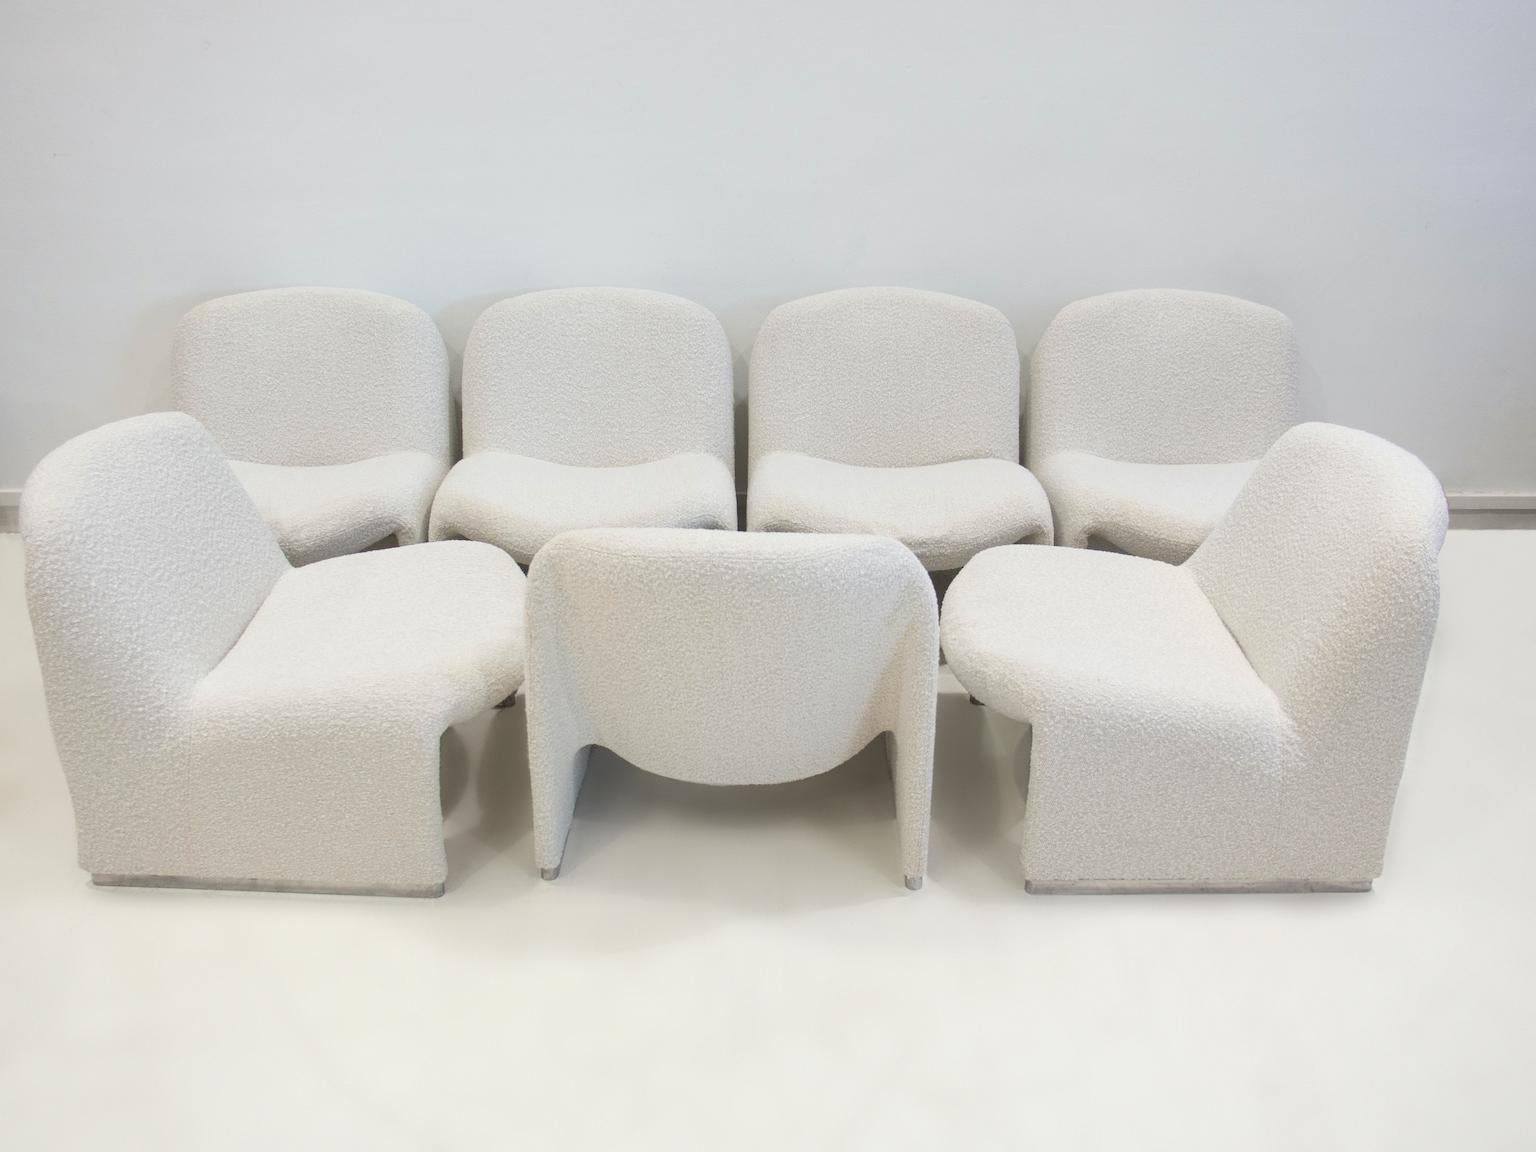 20th Century Five White Bouclé Fabric Upholstered Giancarlo Piretti Alky Easy Chairs For Sale